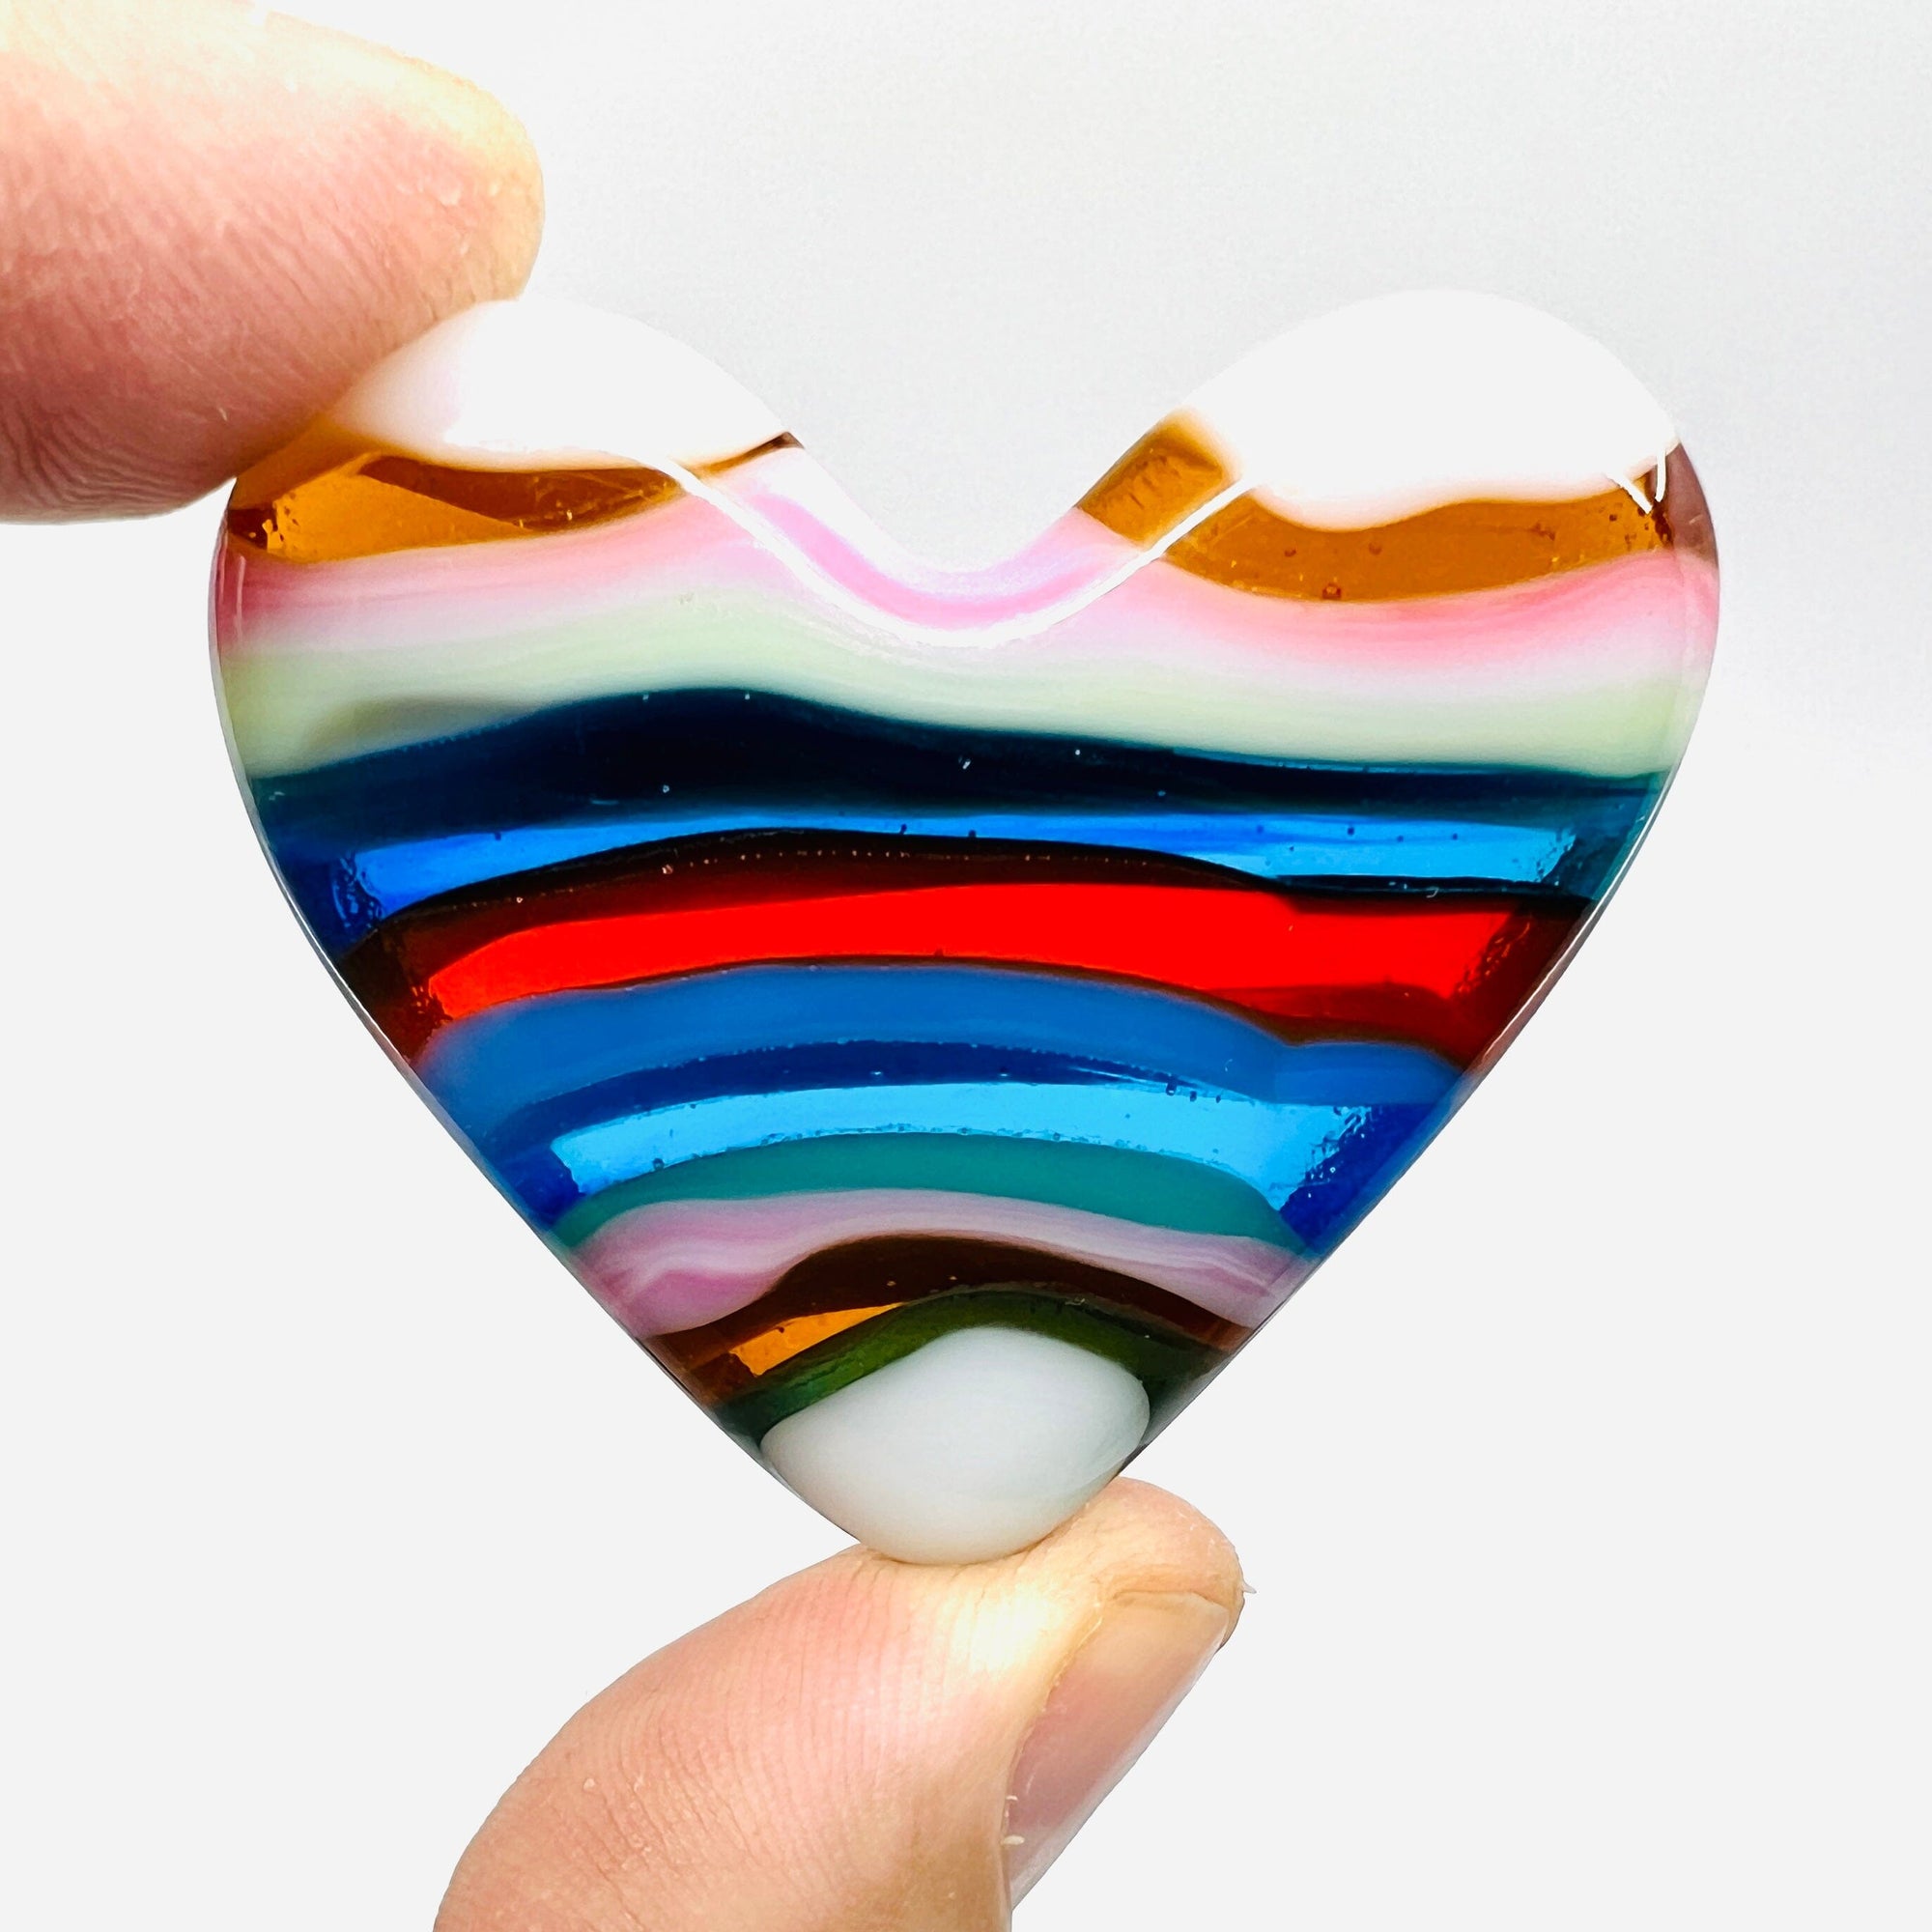 Fused Pocket Heart 922 Miniature Glimmer Glass Gifts 